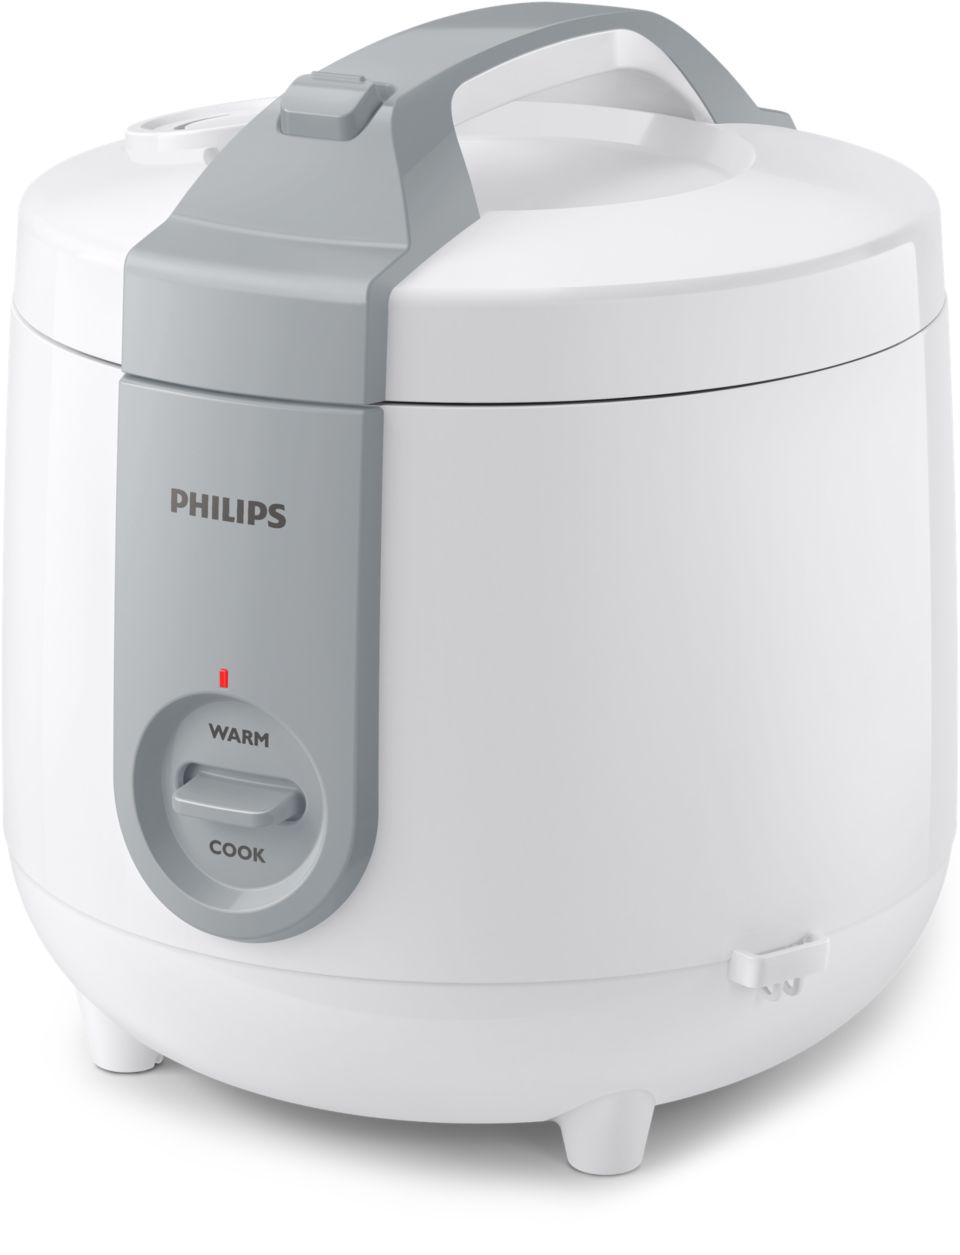 https://images.philips.com/is/image/philipsconsumer/e71f05ae537a40f399a3ad1e013cdc95?$jpglarge$&wid=960